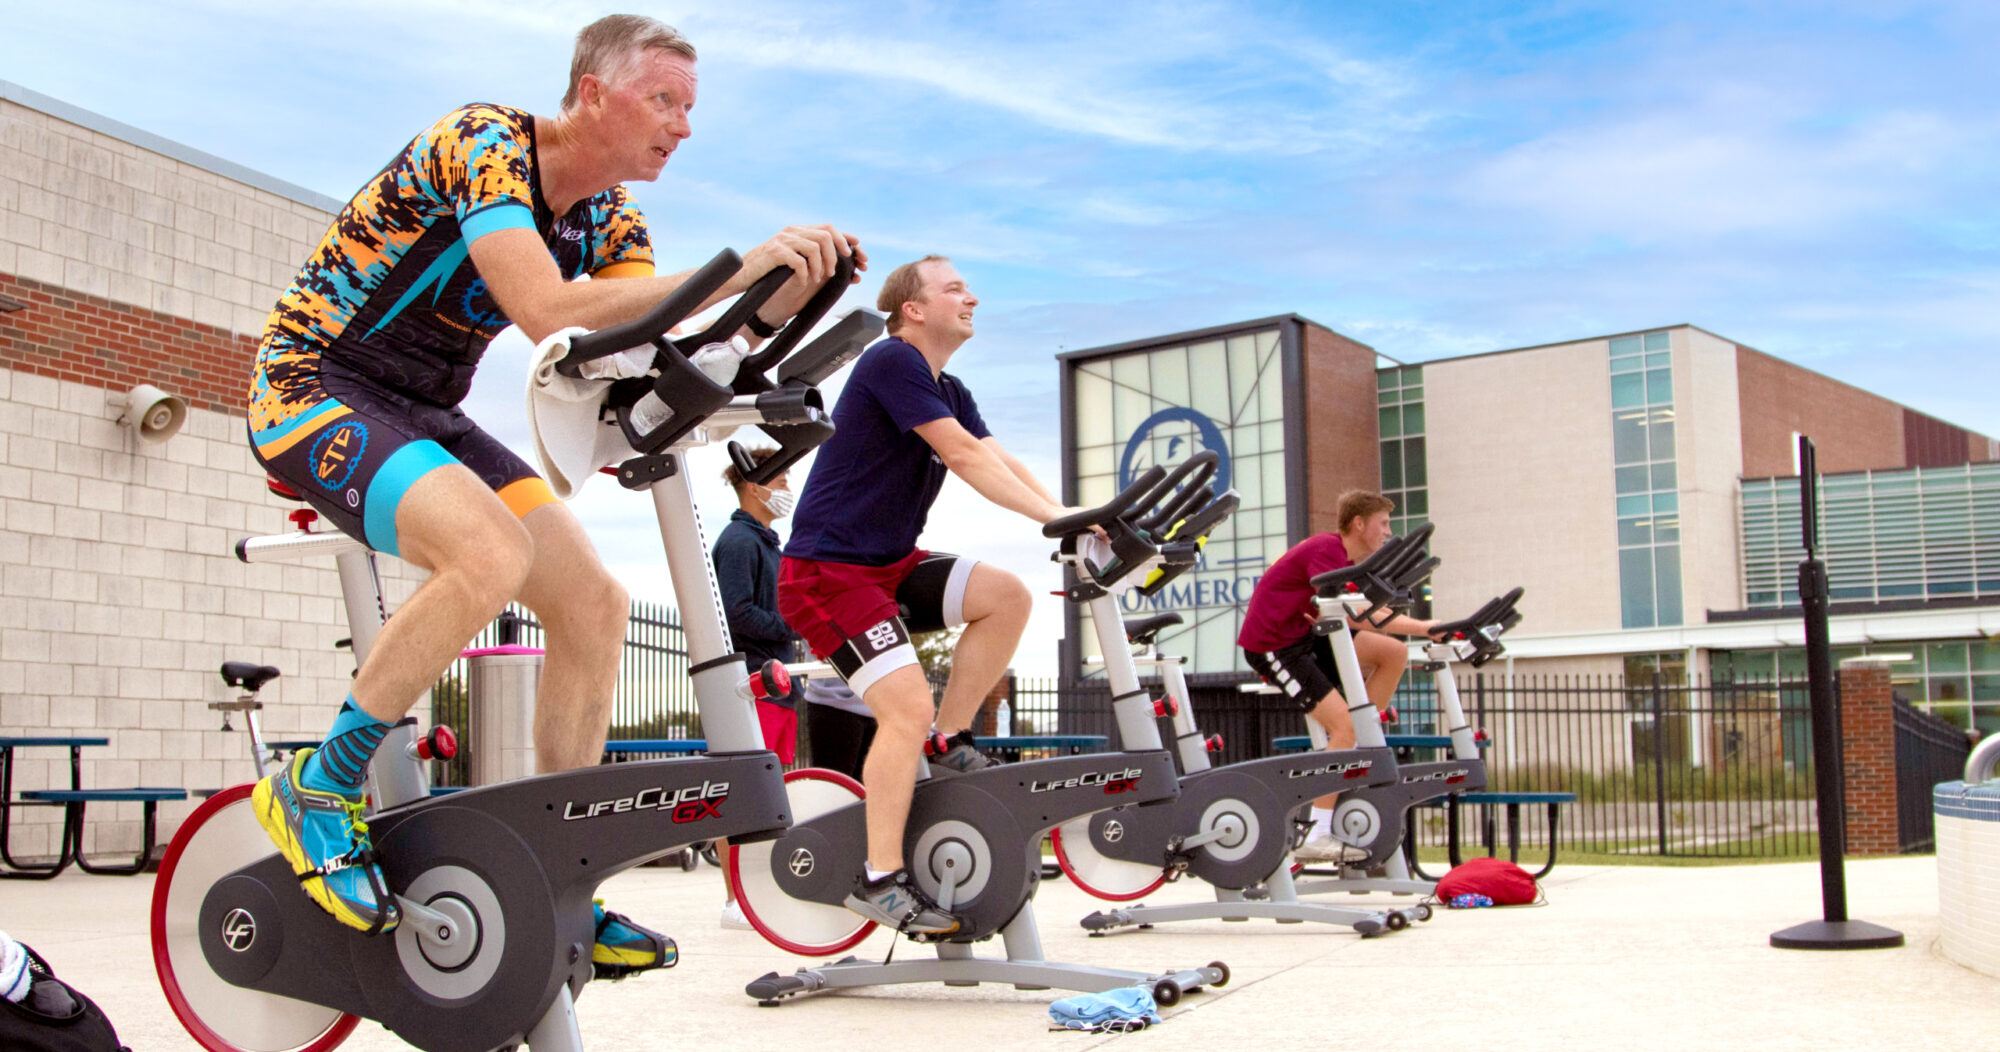 Members during a cycling class by the pool.